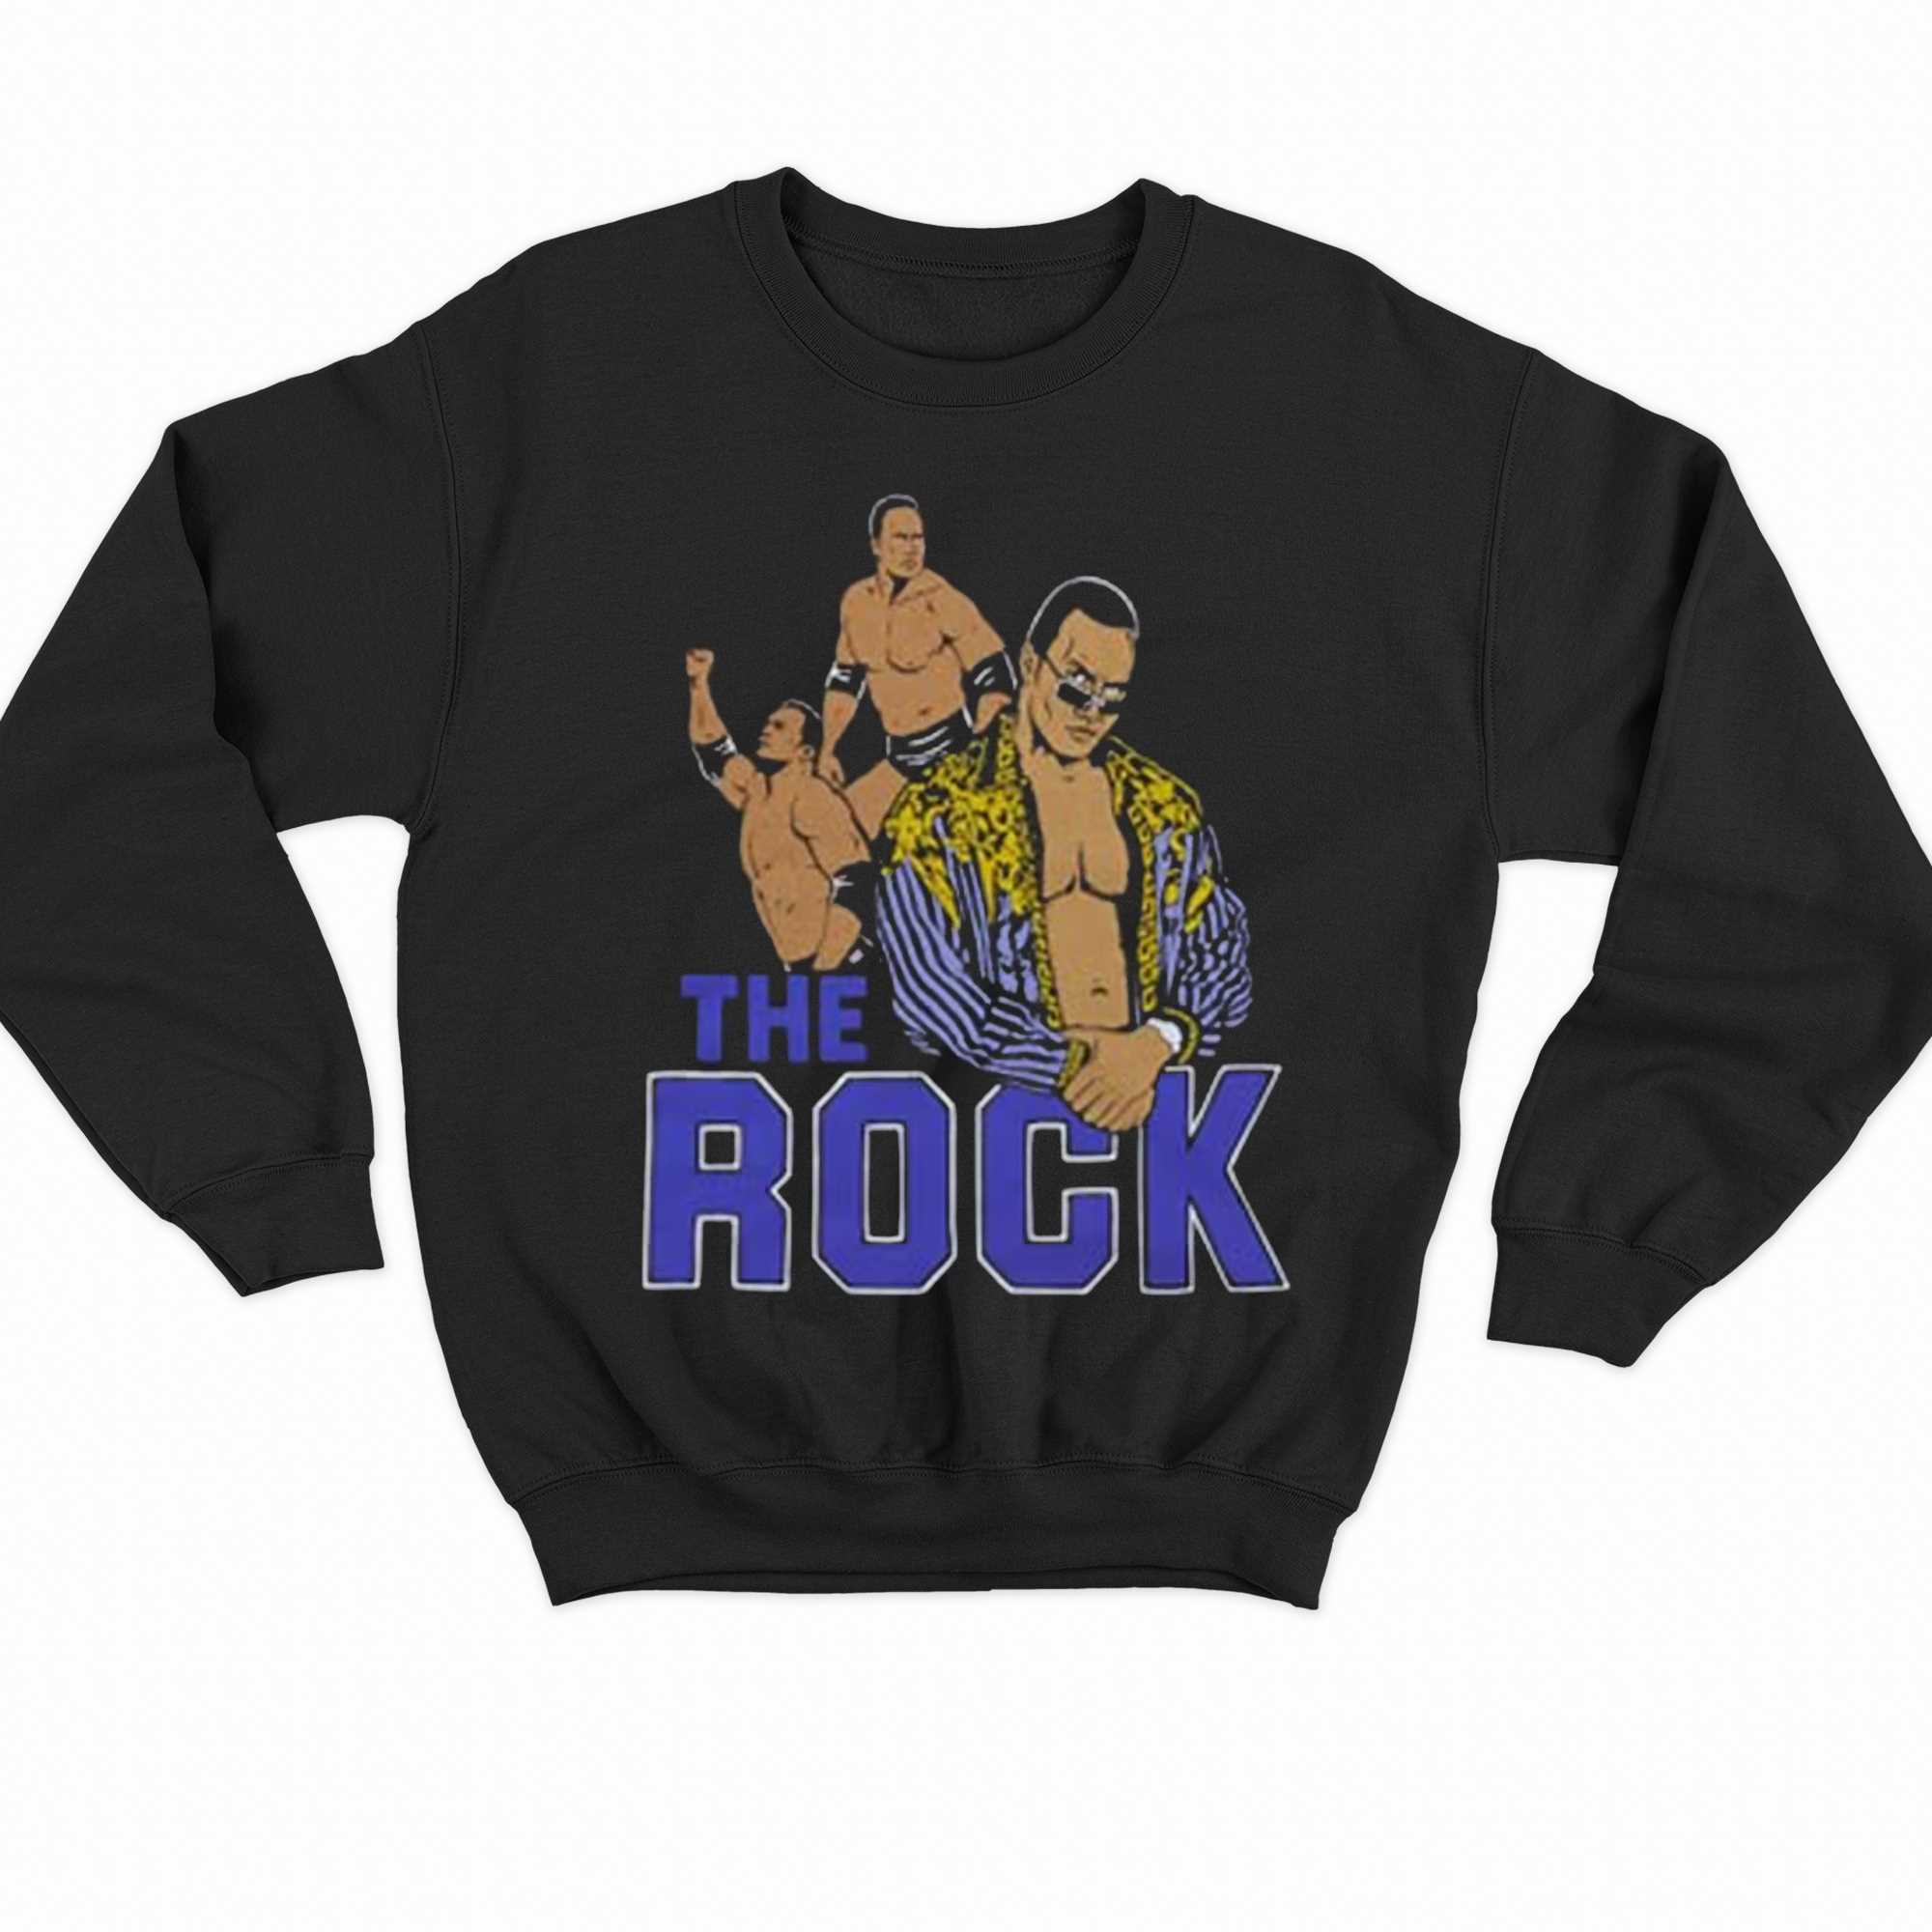 The Rock Homage Illustrated T-shirt 